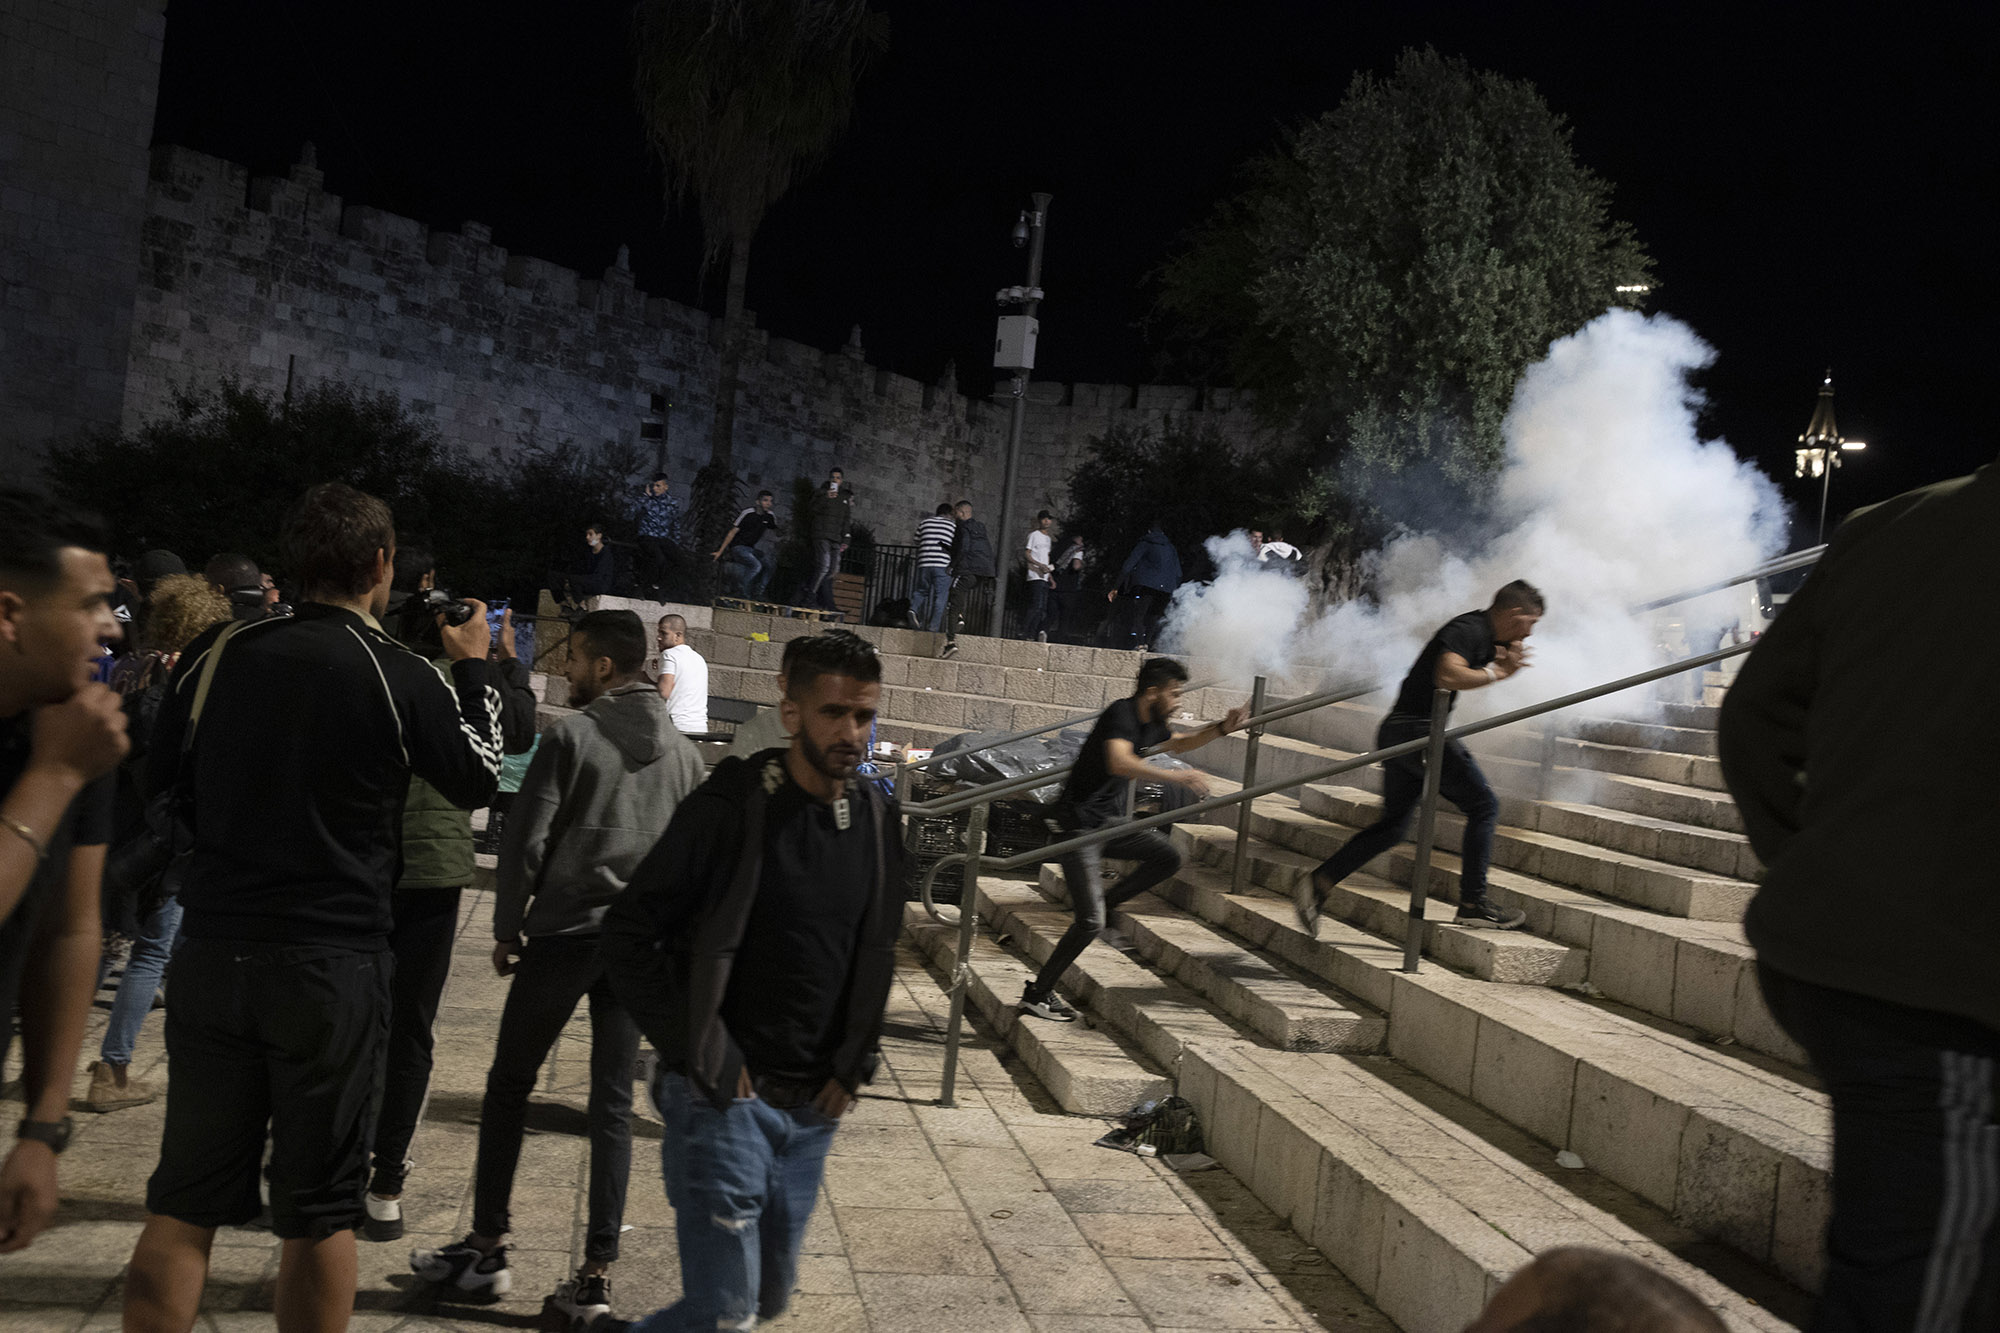 Palestinians react to stun grenades fired by Israeli police to clear the Damascus Gate after clashes at the Al-Aqsa Mosque compound, May 7.